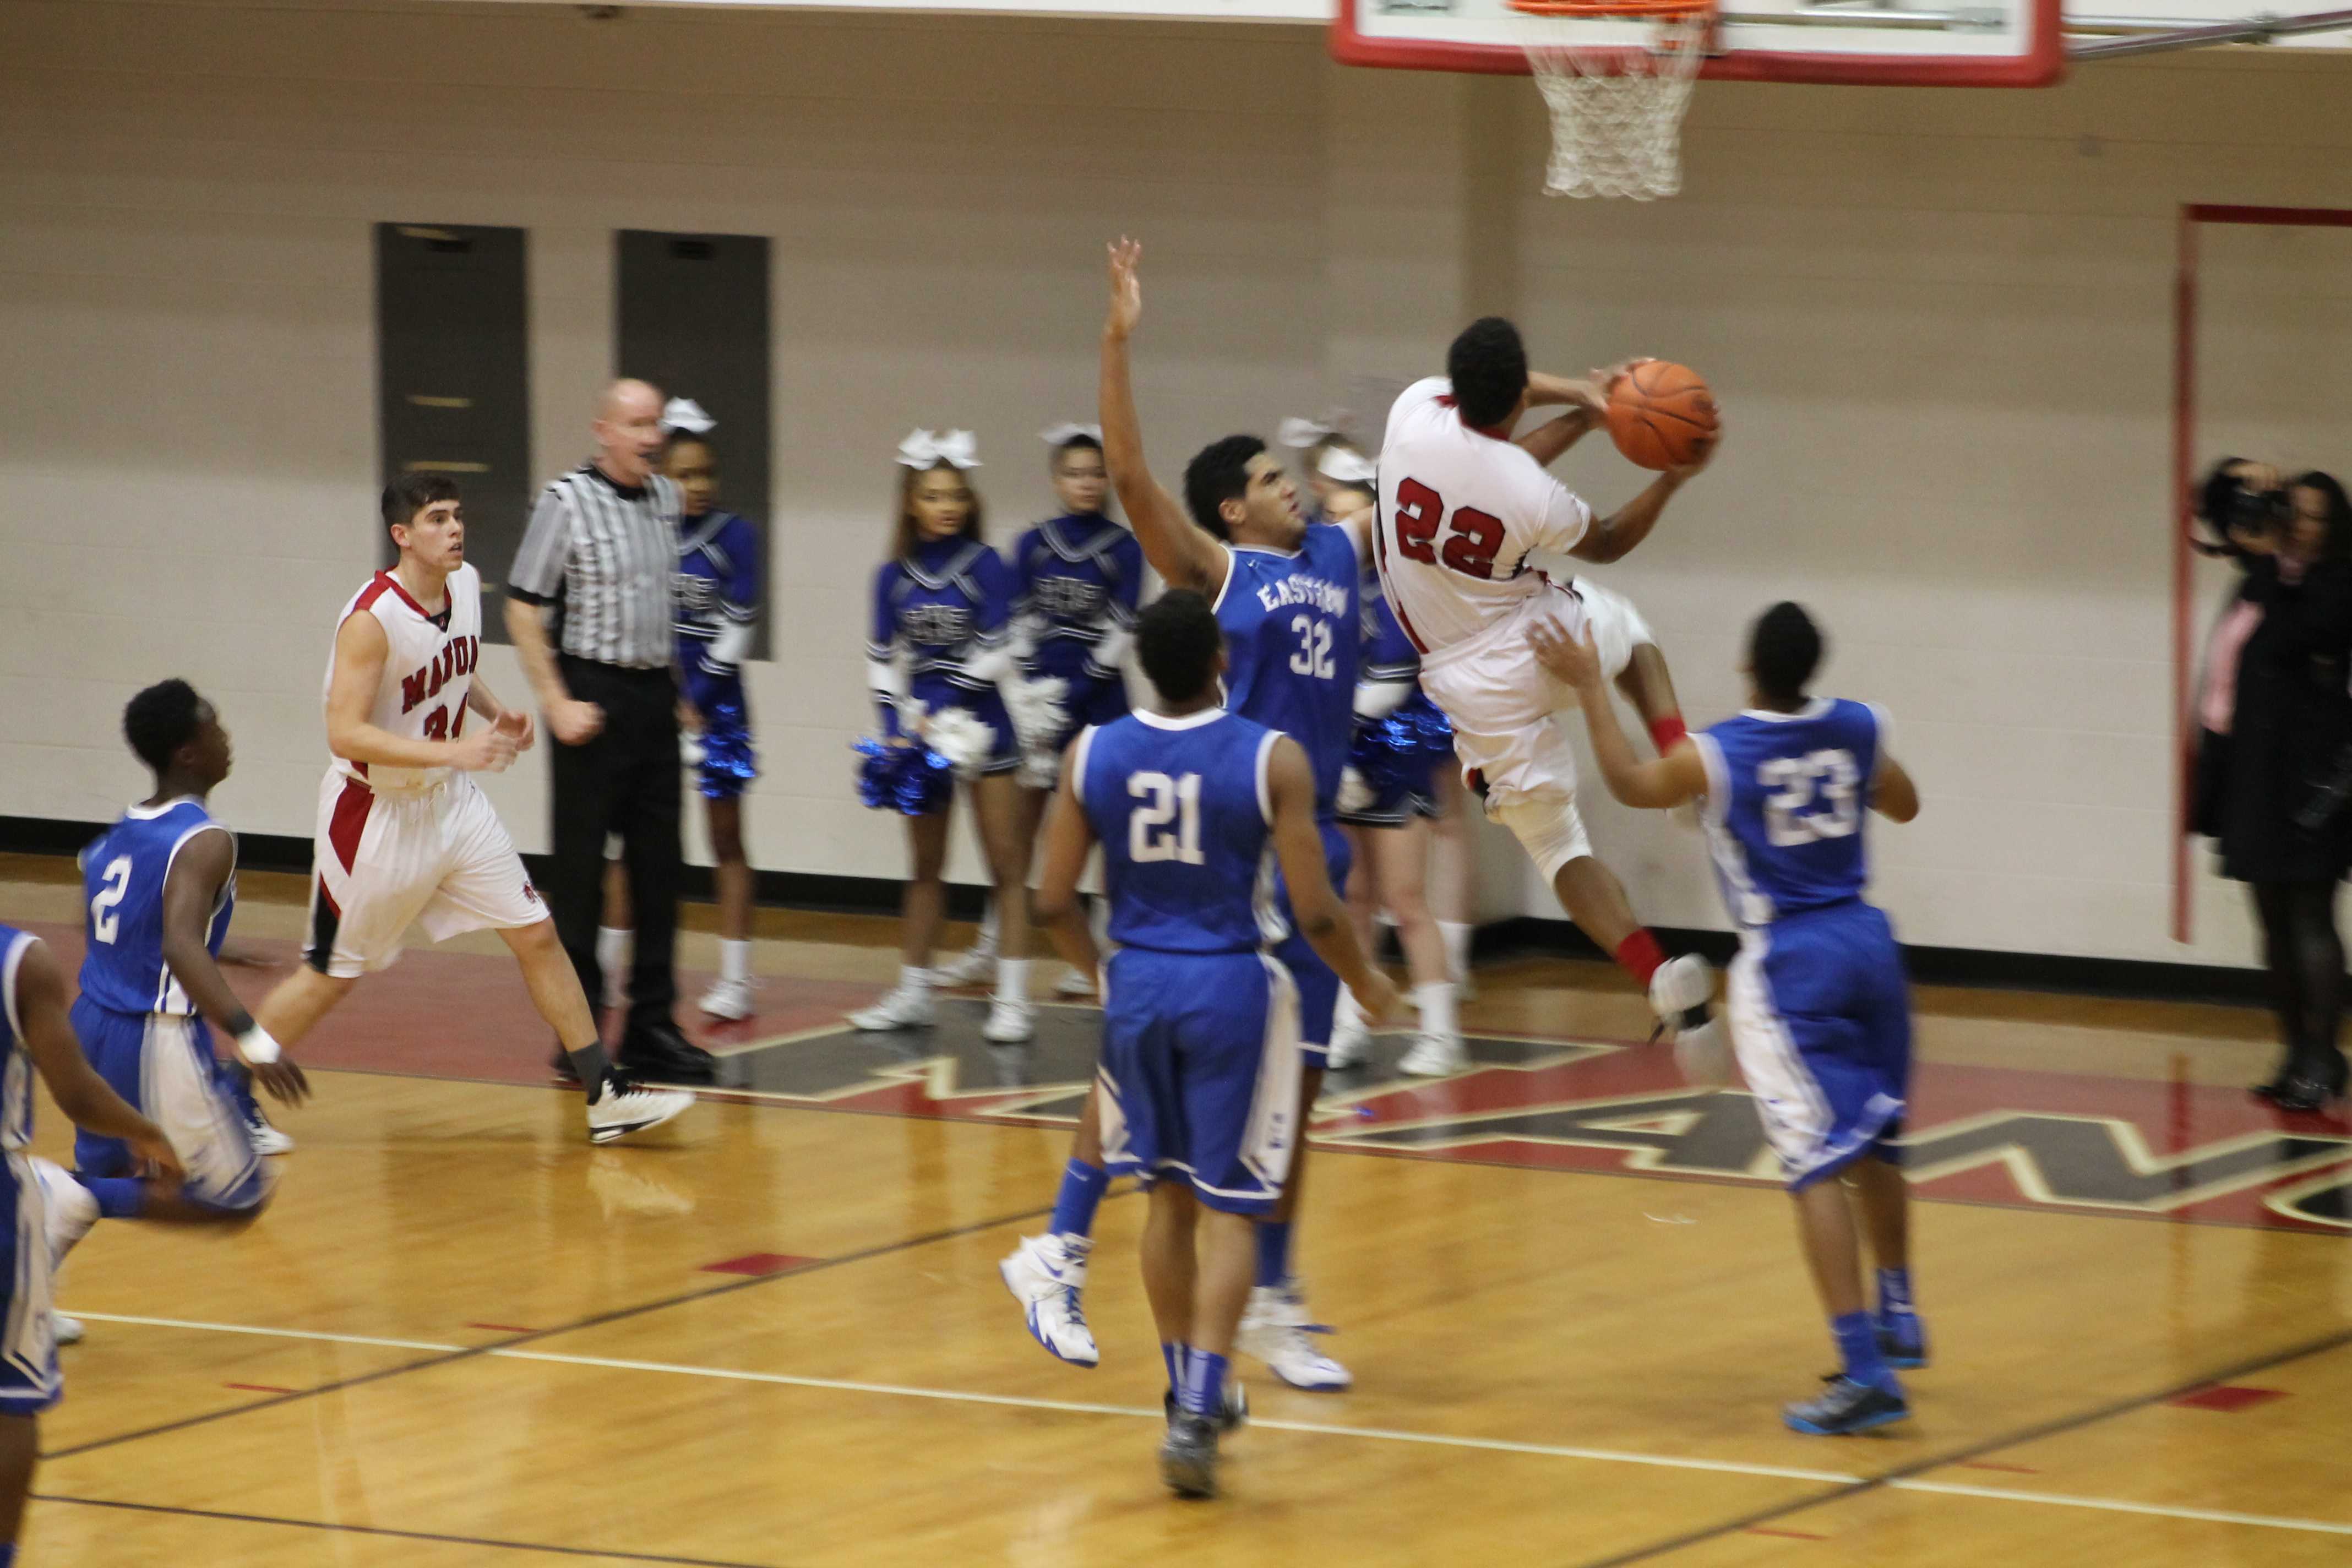 Dwayne Sutton (12, #22) goes up for a layup. Sutton is Manuals leading scorer this season.